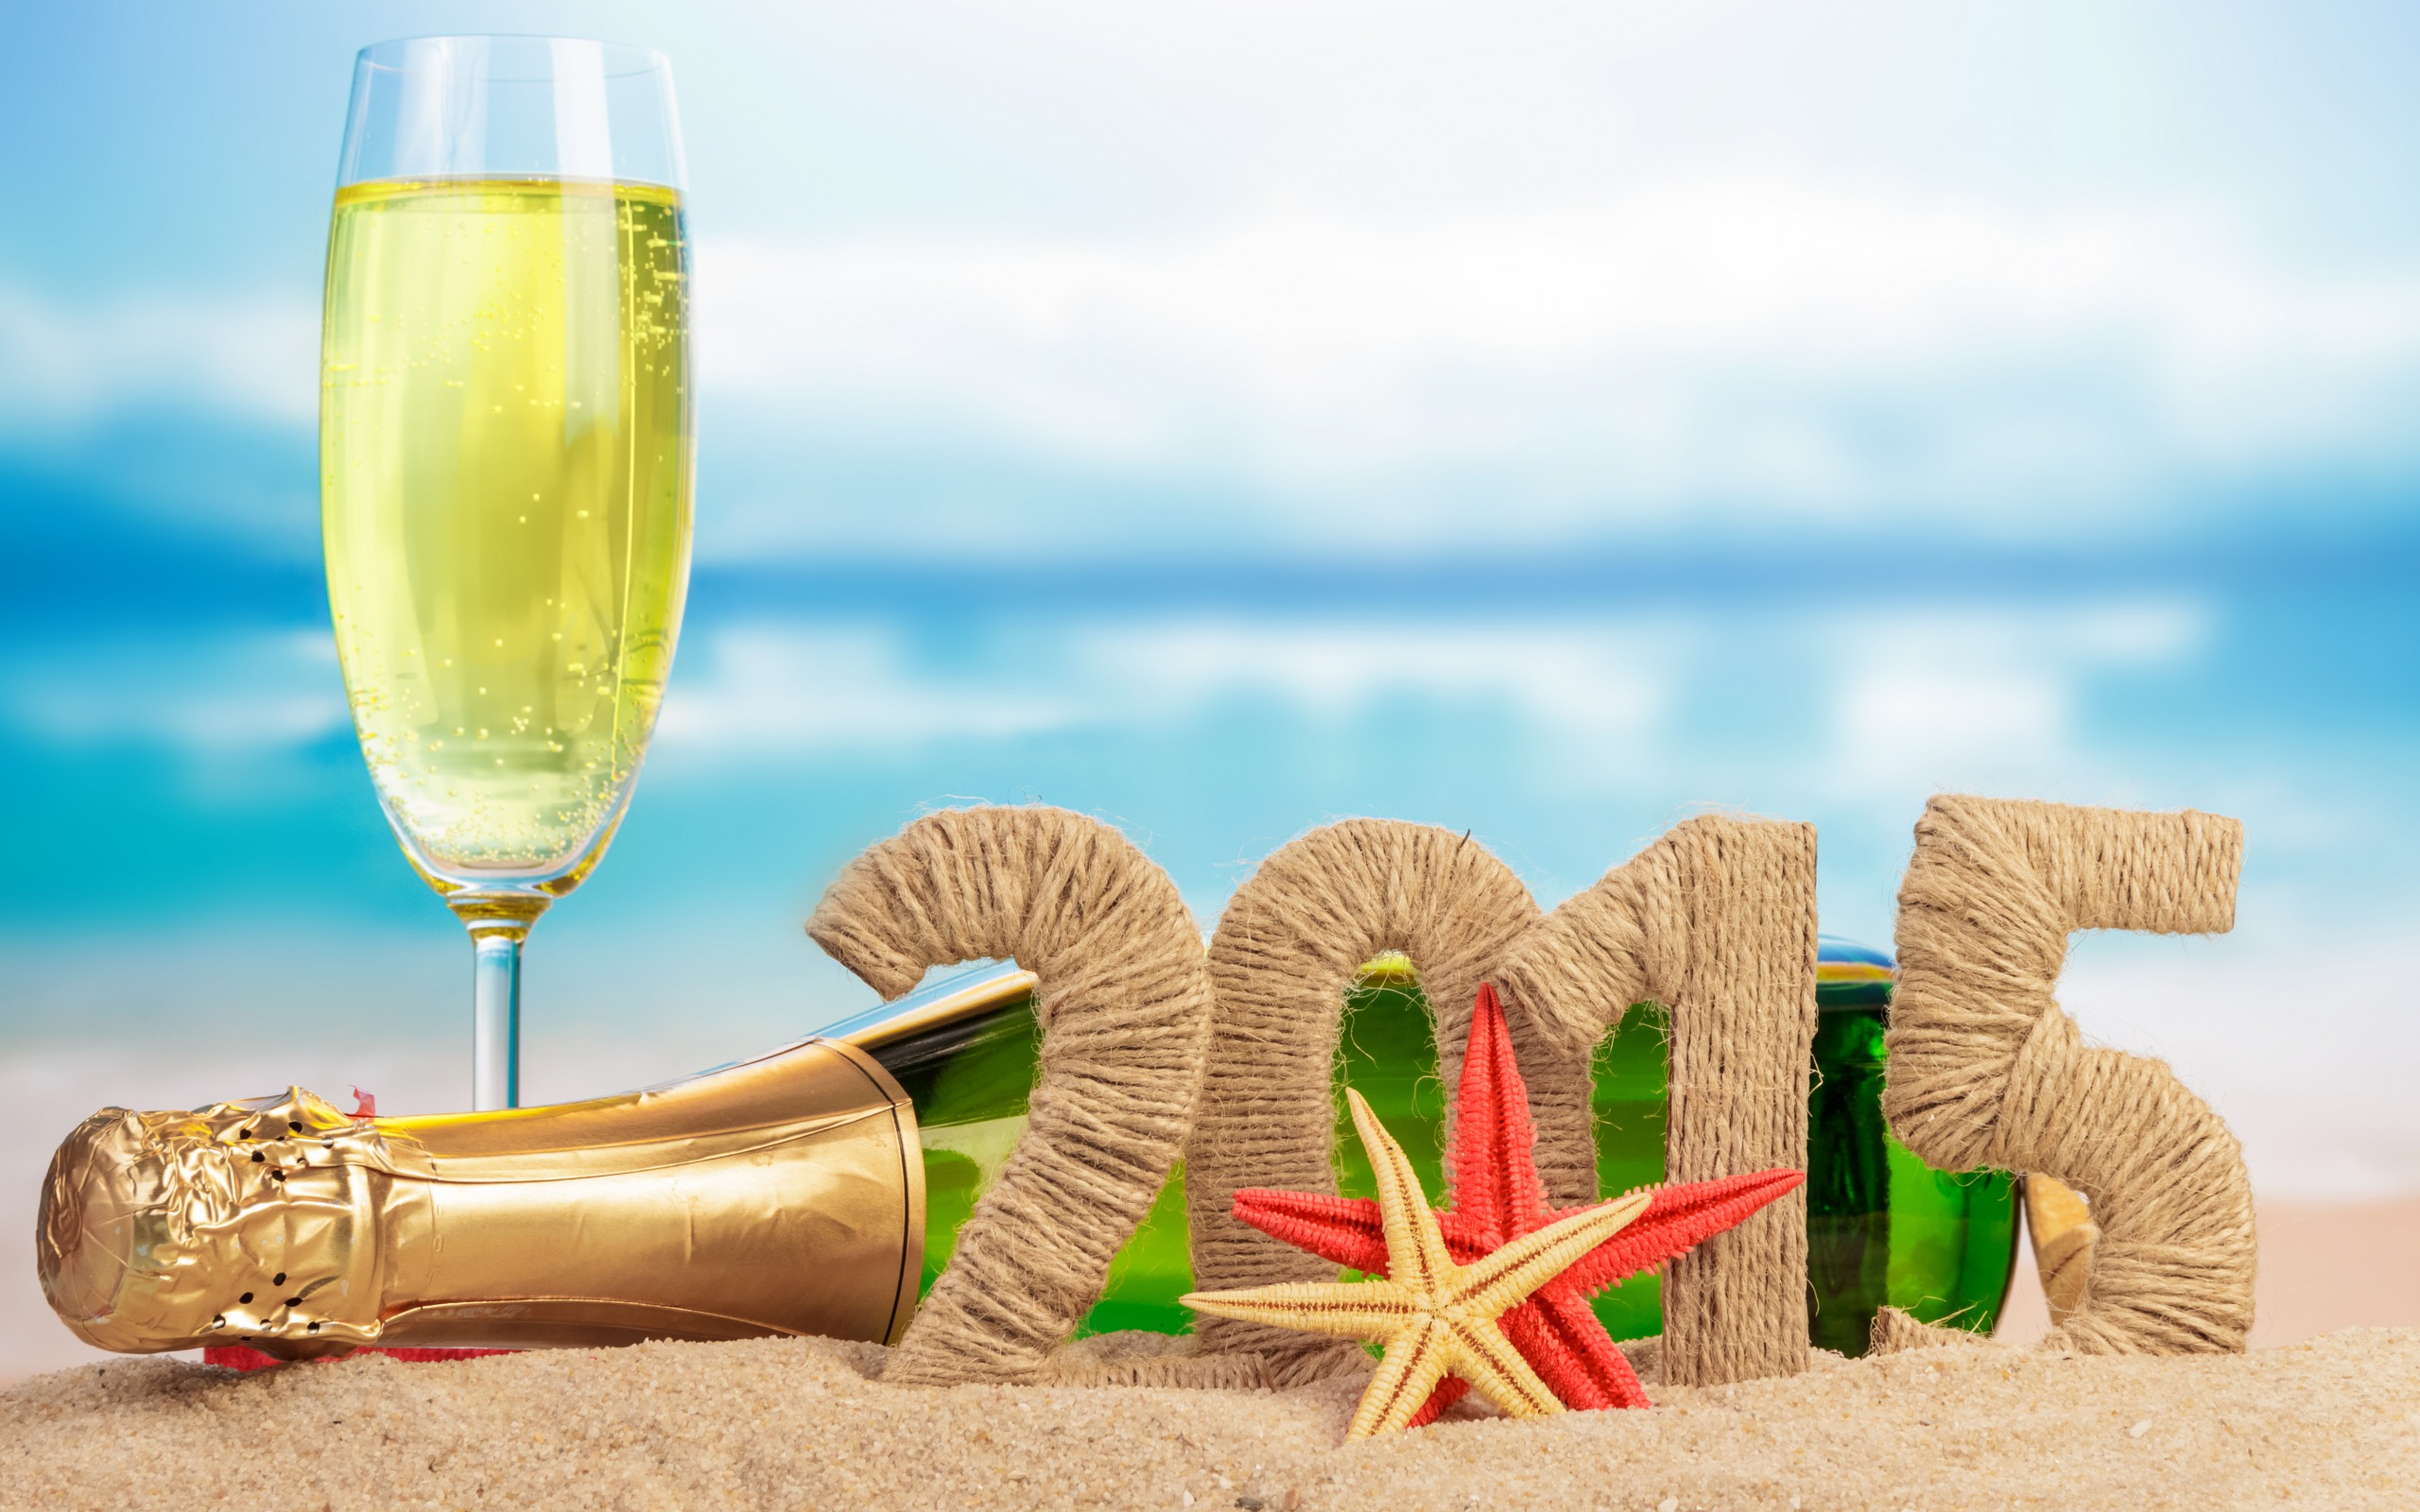 New Year Beach Champaign Glass Bottle Wallpaper Search